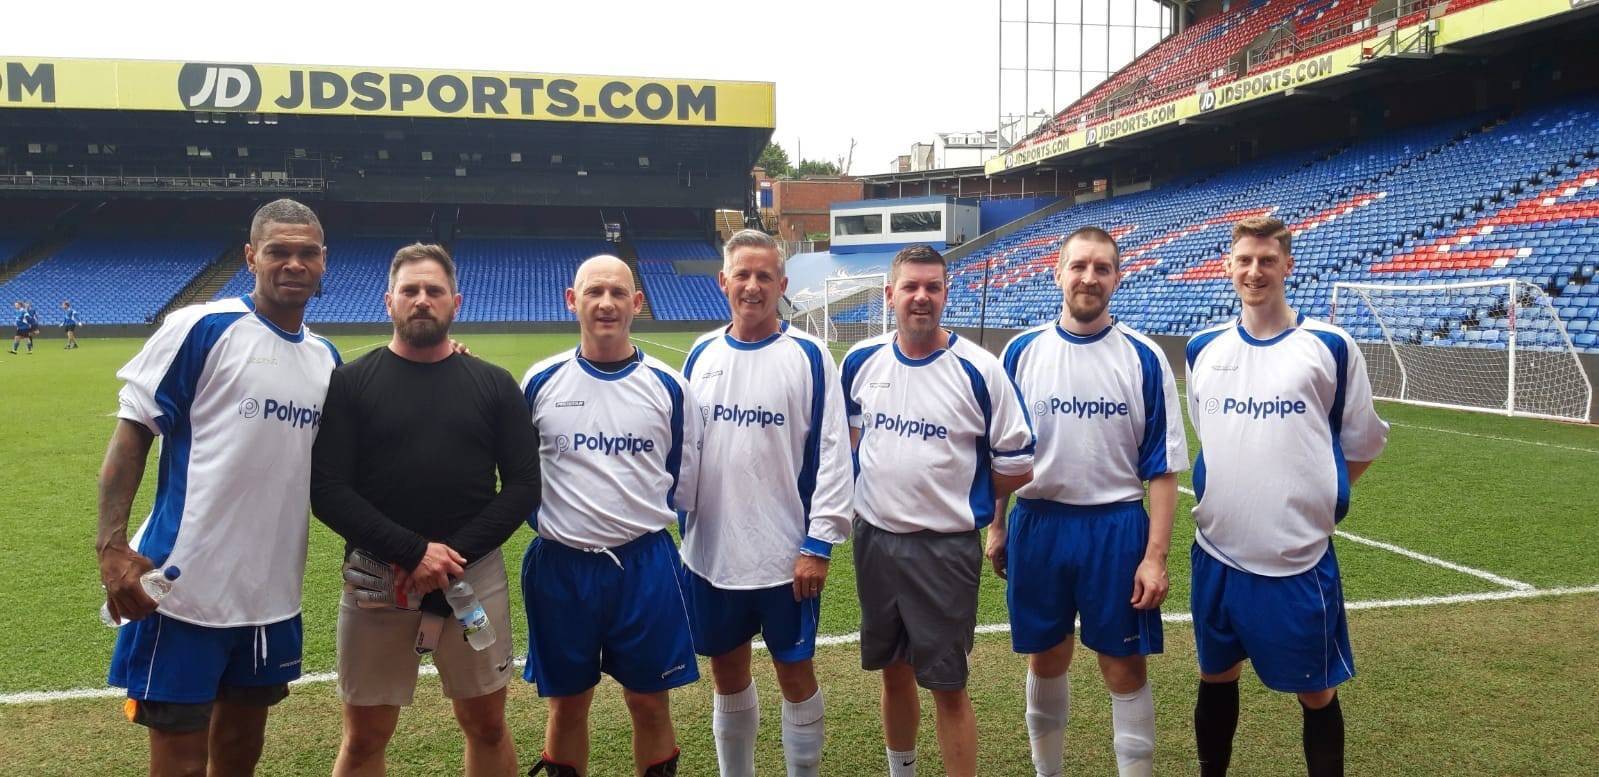 Polypipe recently took part in the annual Rudridge 7 a side football tournament at Selhurst Park in London